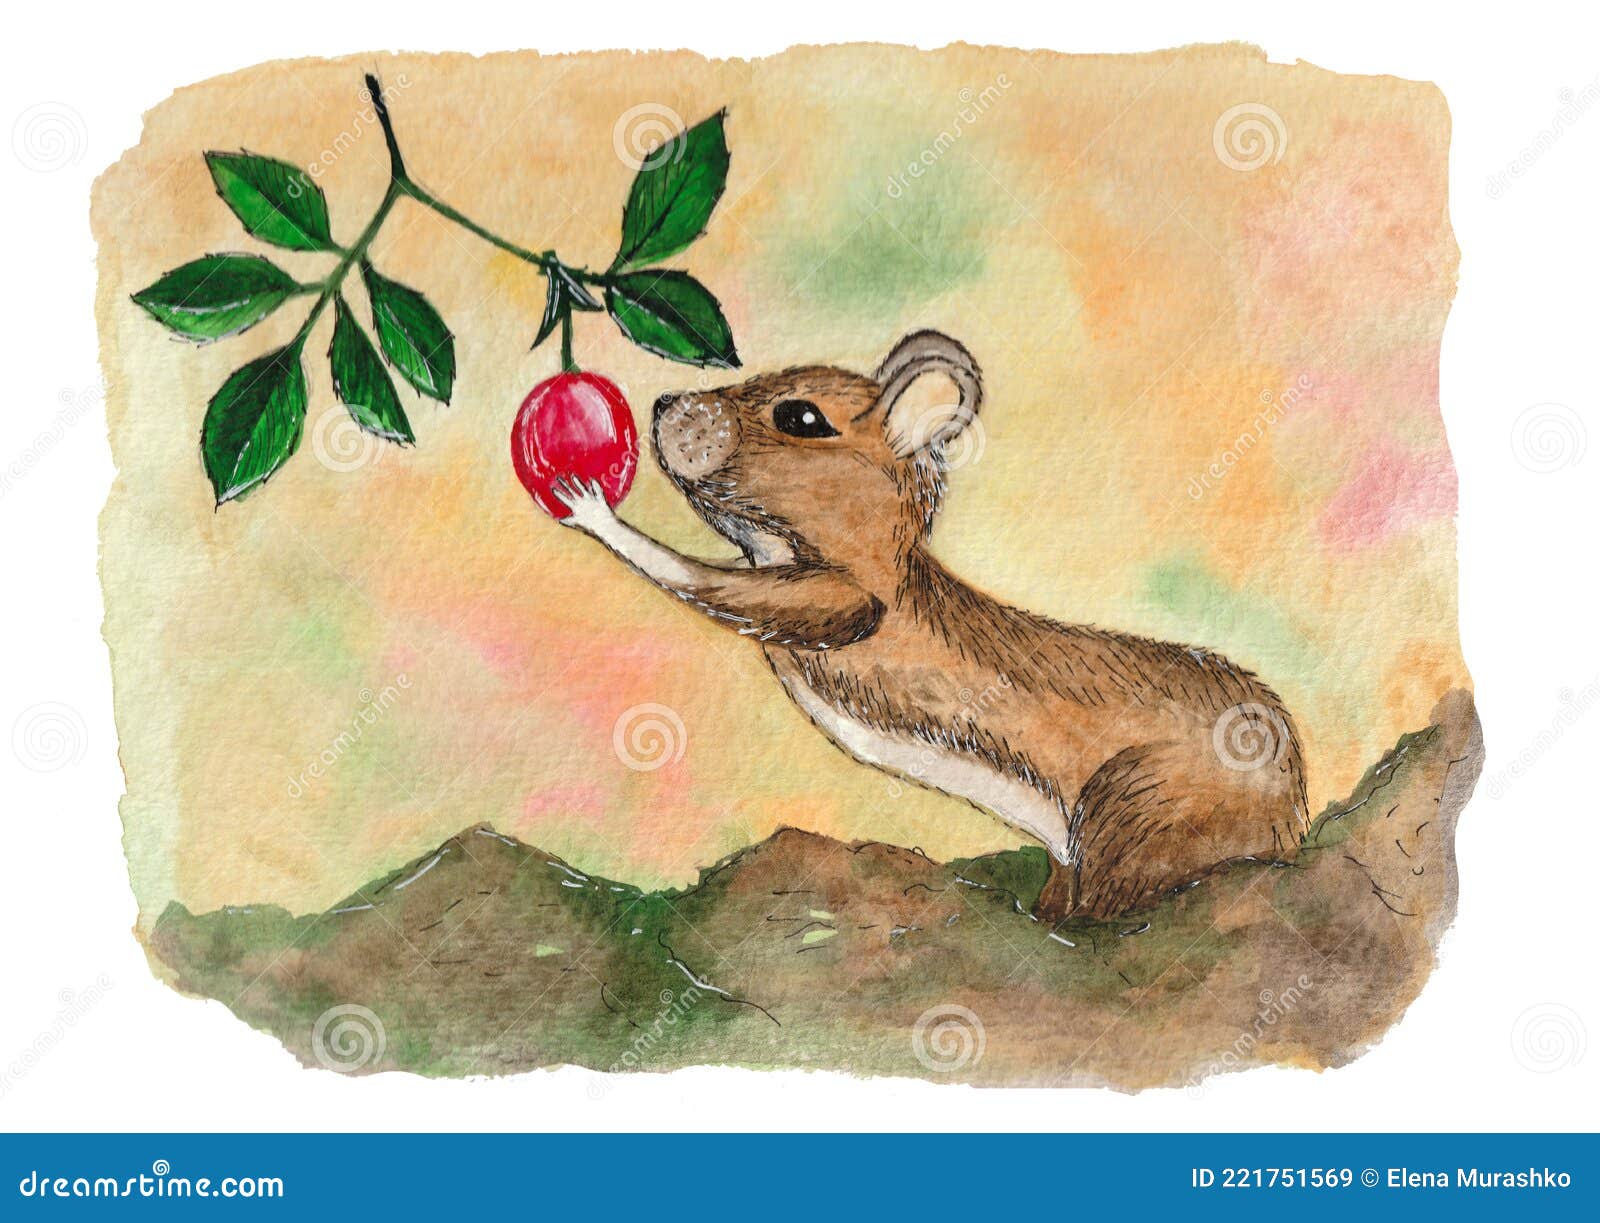 Field Mouse Vector Images over 980